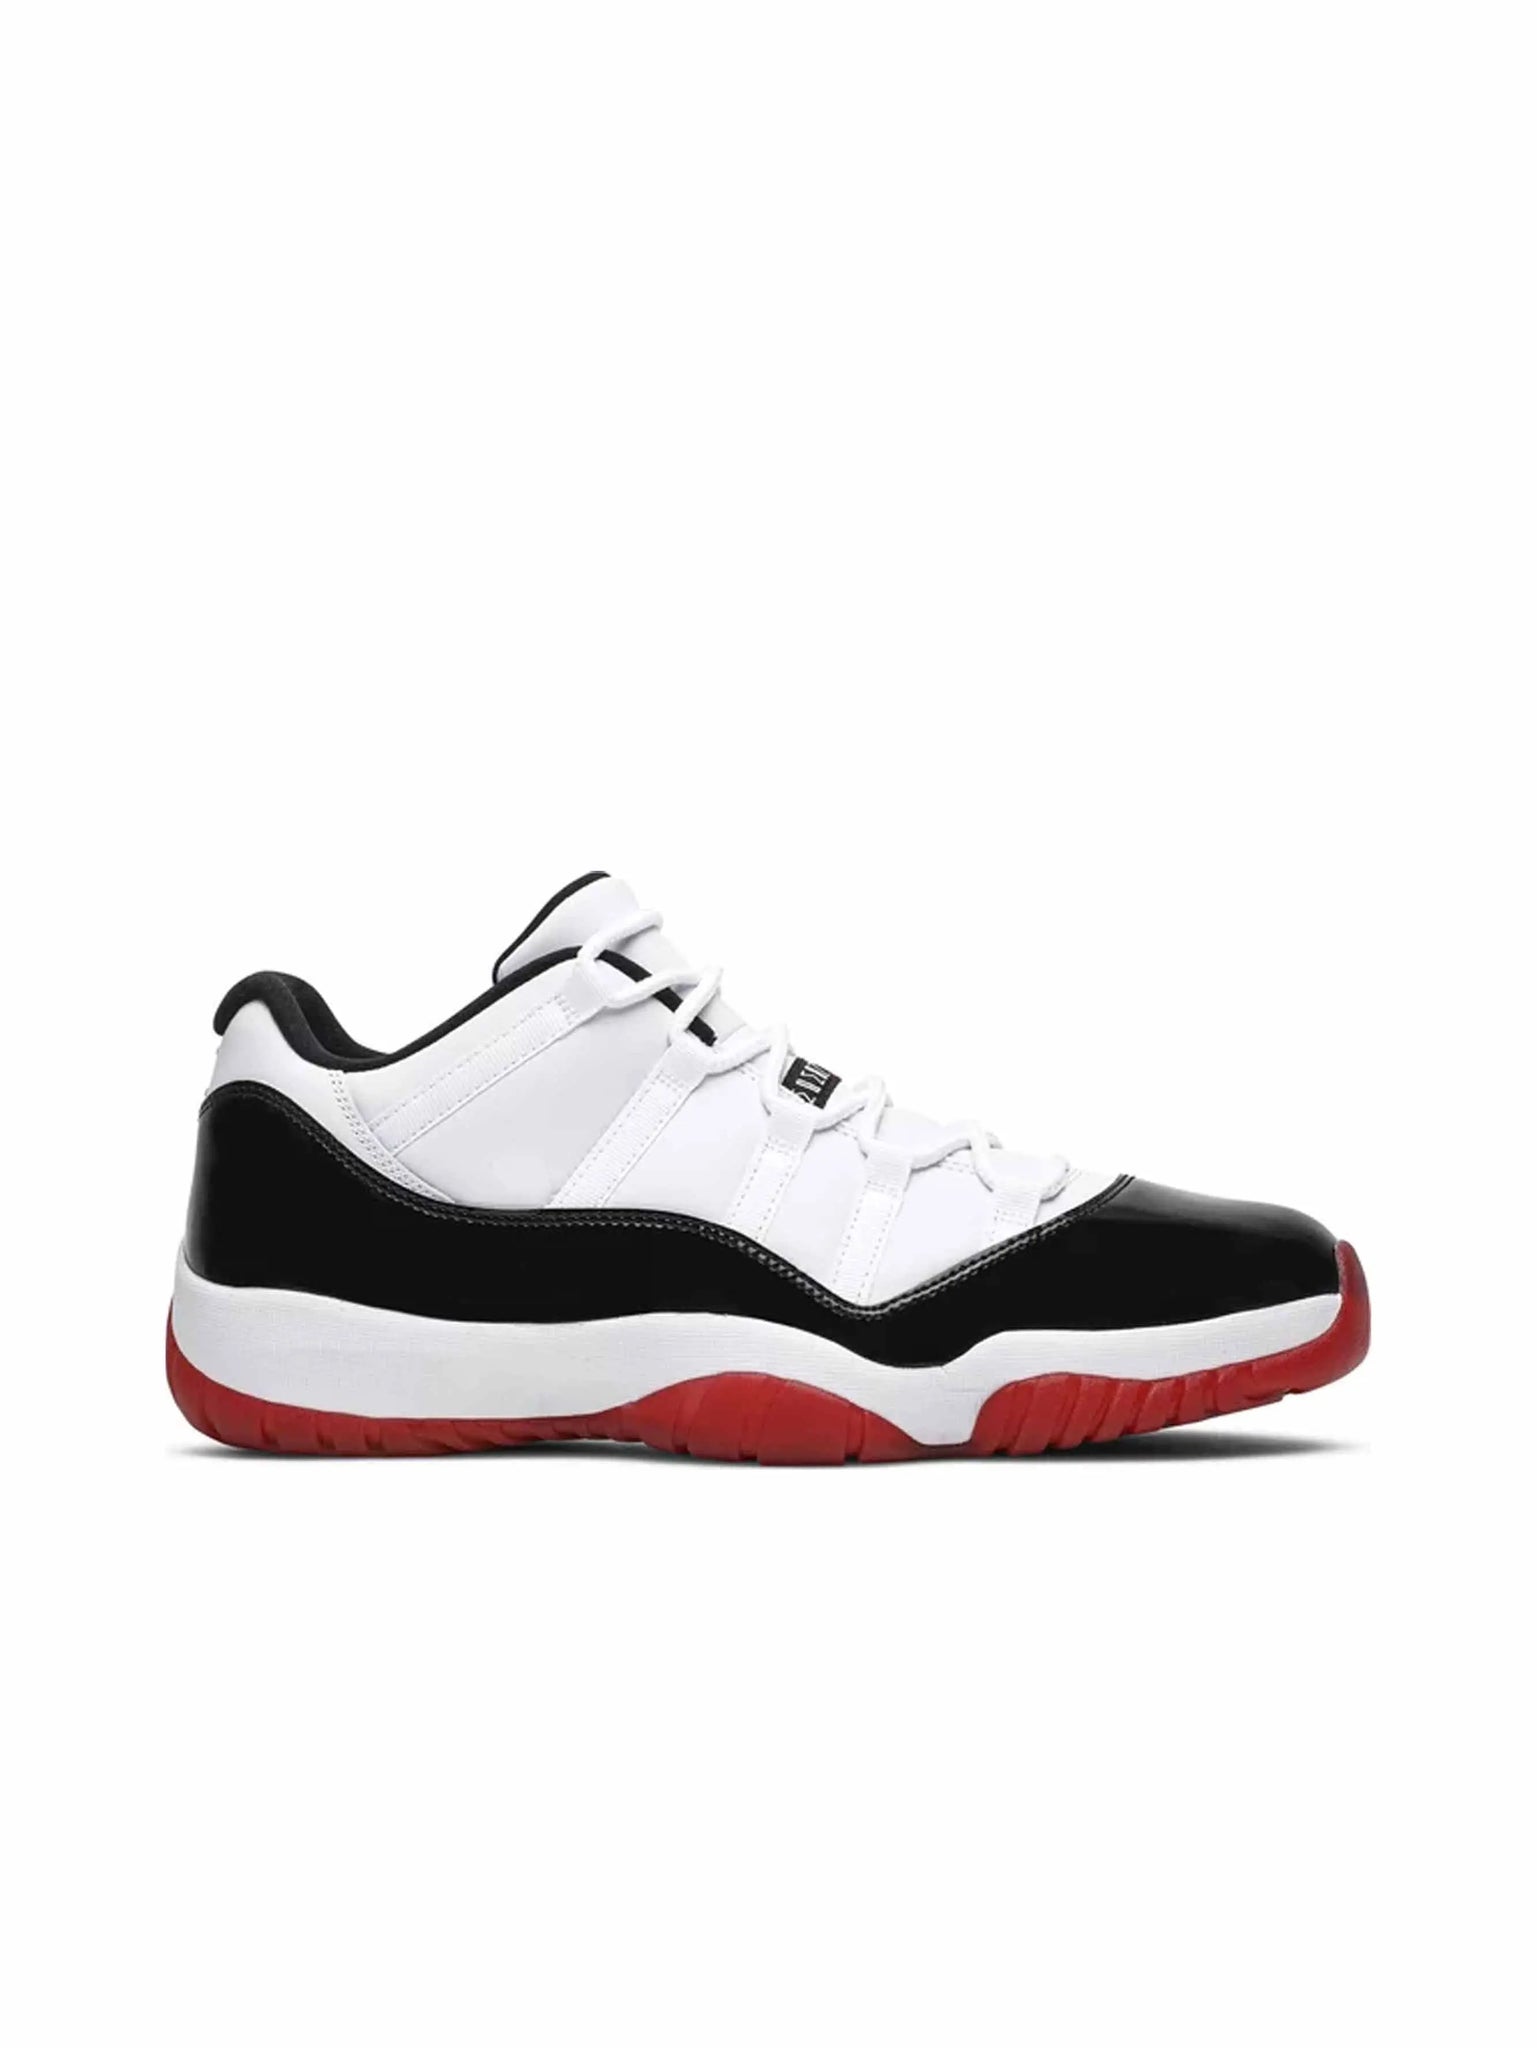 Jordan 11 Retro Low Concord Bred in Auckland, New Zealand - Shop name